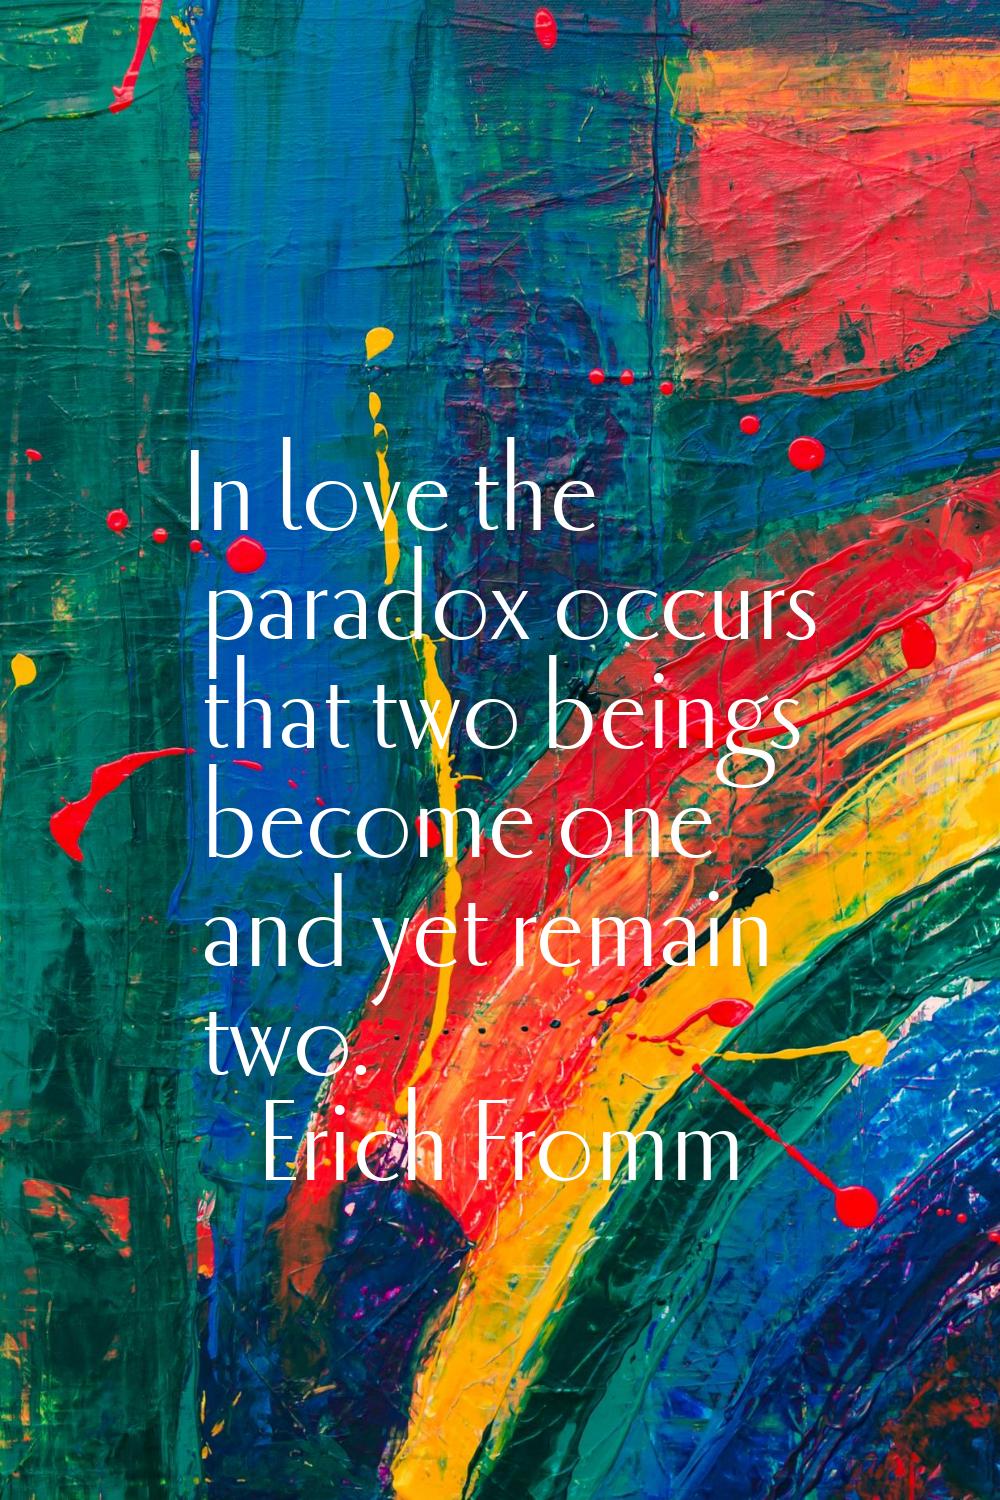 In love the paradox occurs that two beings become one and yet remain two.